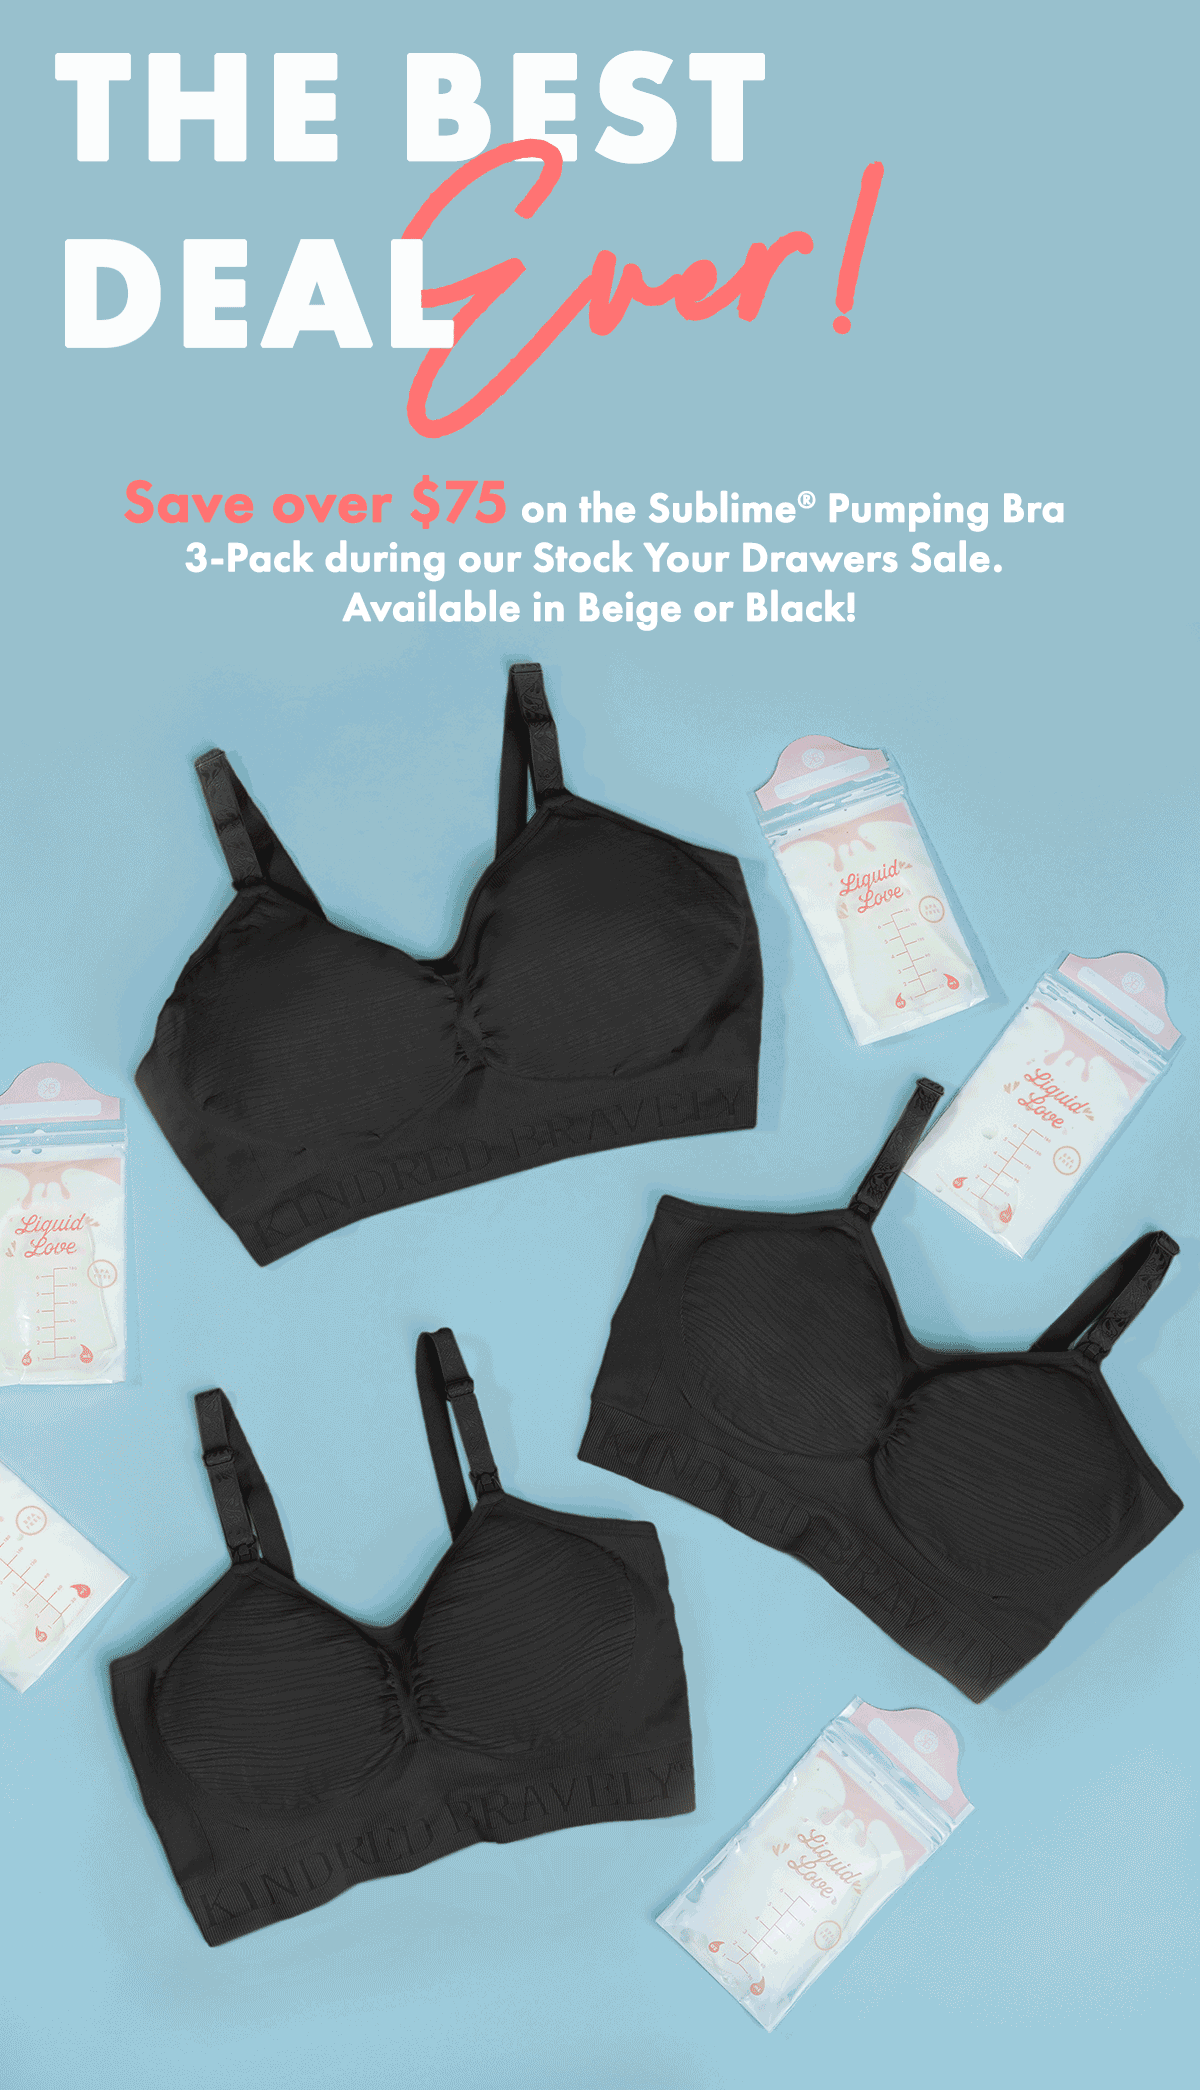 Save over $75 on the Sublime®️ Pumping Bra 3-Pack during our Stock Your Drawers Sale. Available in Beige or Black!